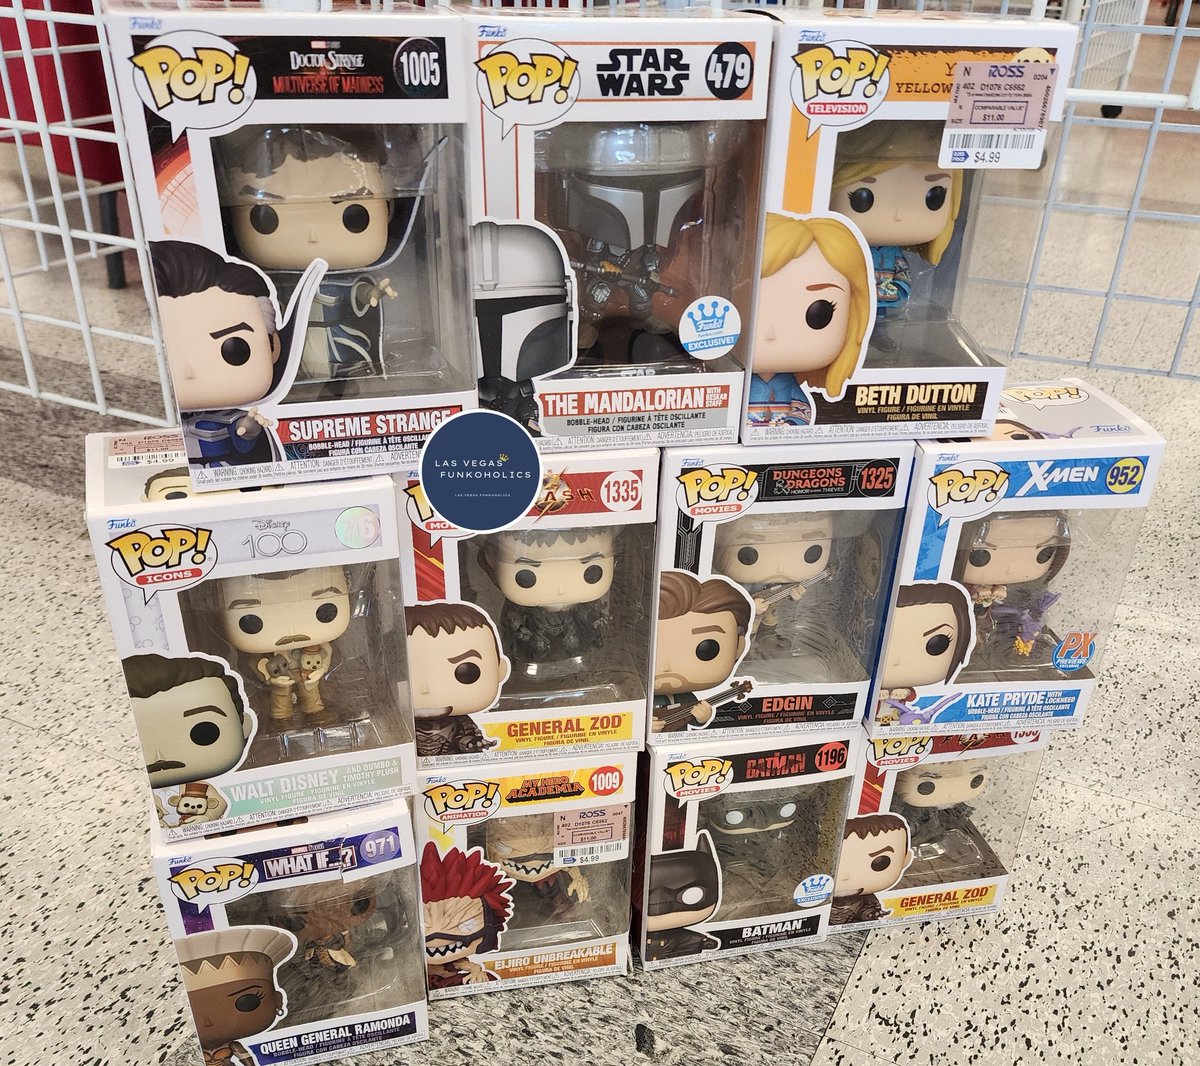 Spotted some deals at Ross @originalfunko Funko Exclusive Mandalorian with Beskar Staff.

Discount Retailers availability may vary depending on store location.

#pops #funko #funkopops #funkocollector #funkopop   #getoffthecouchandhunt #rossfinds #mandalorian #starwars